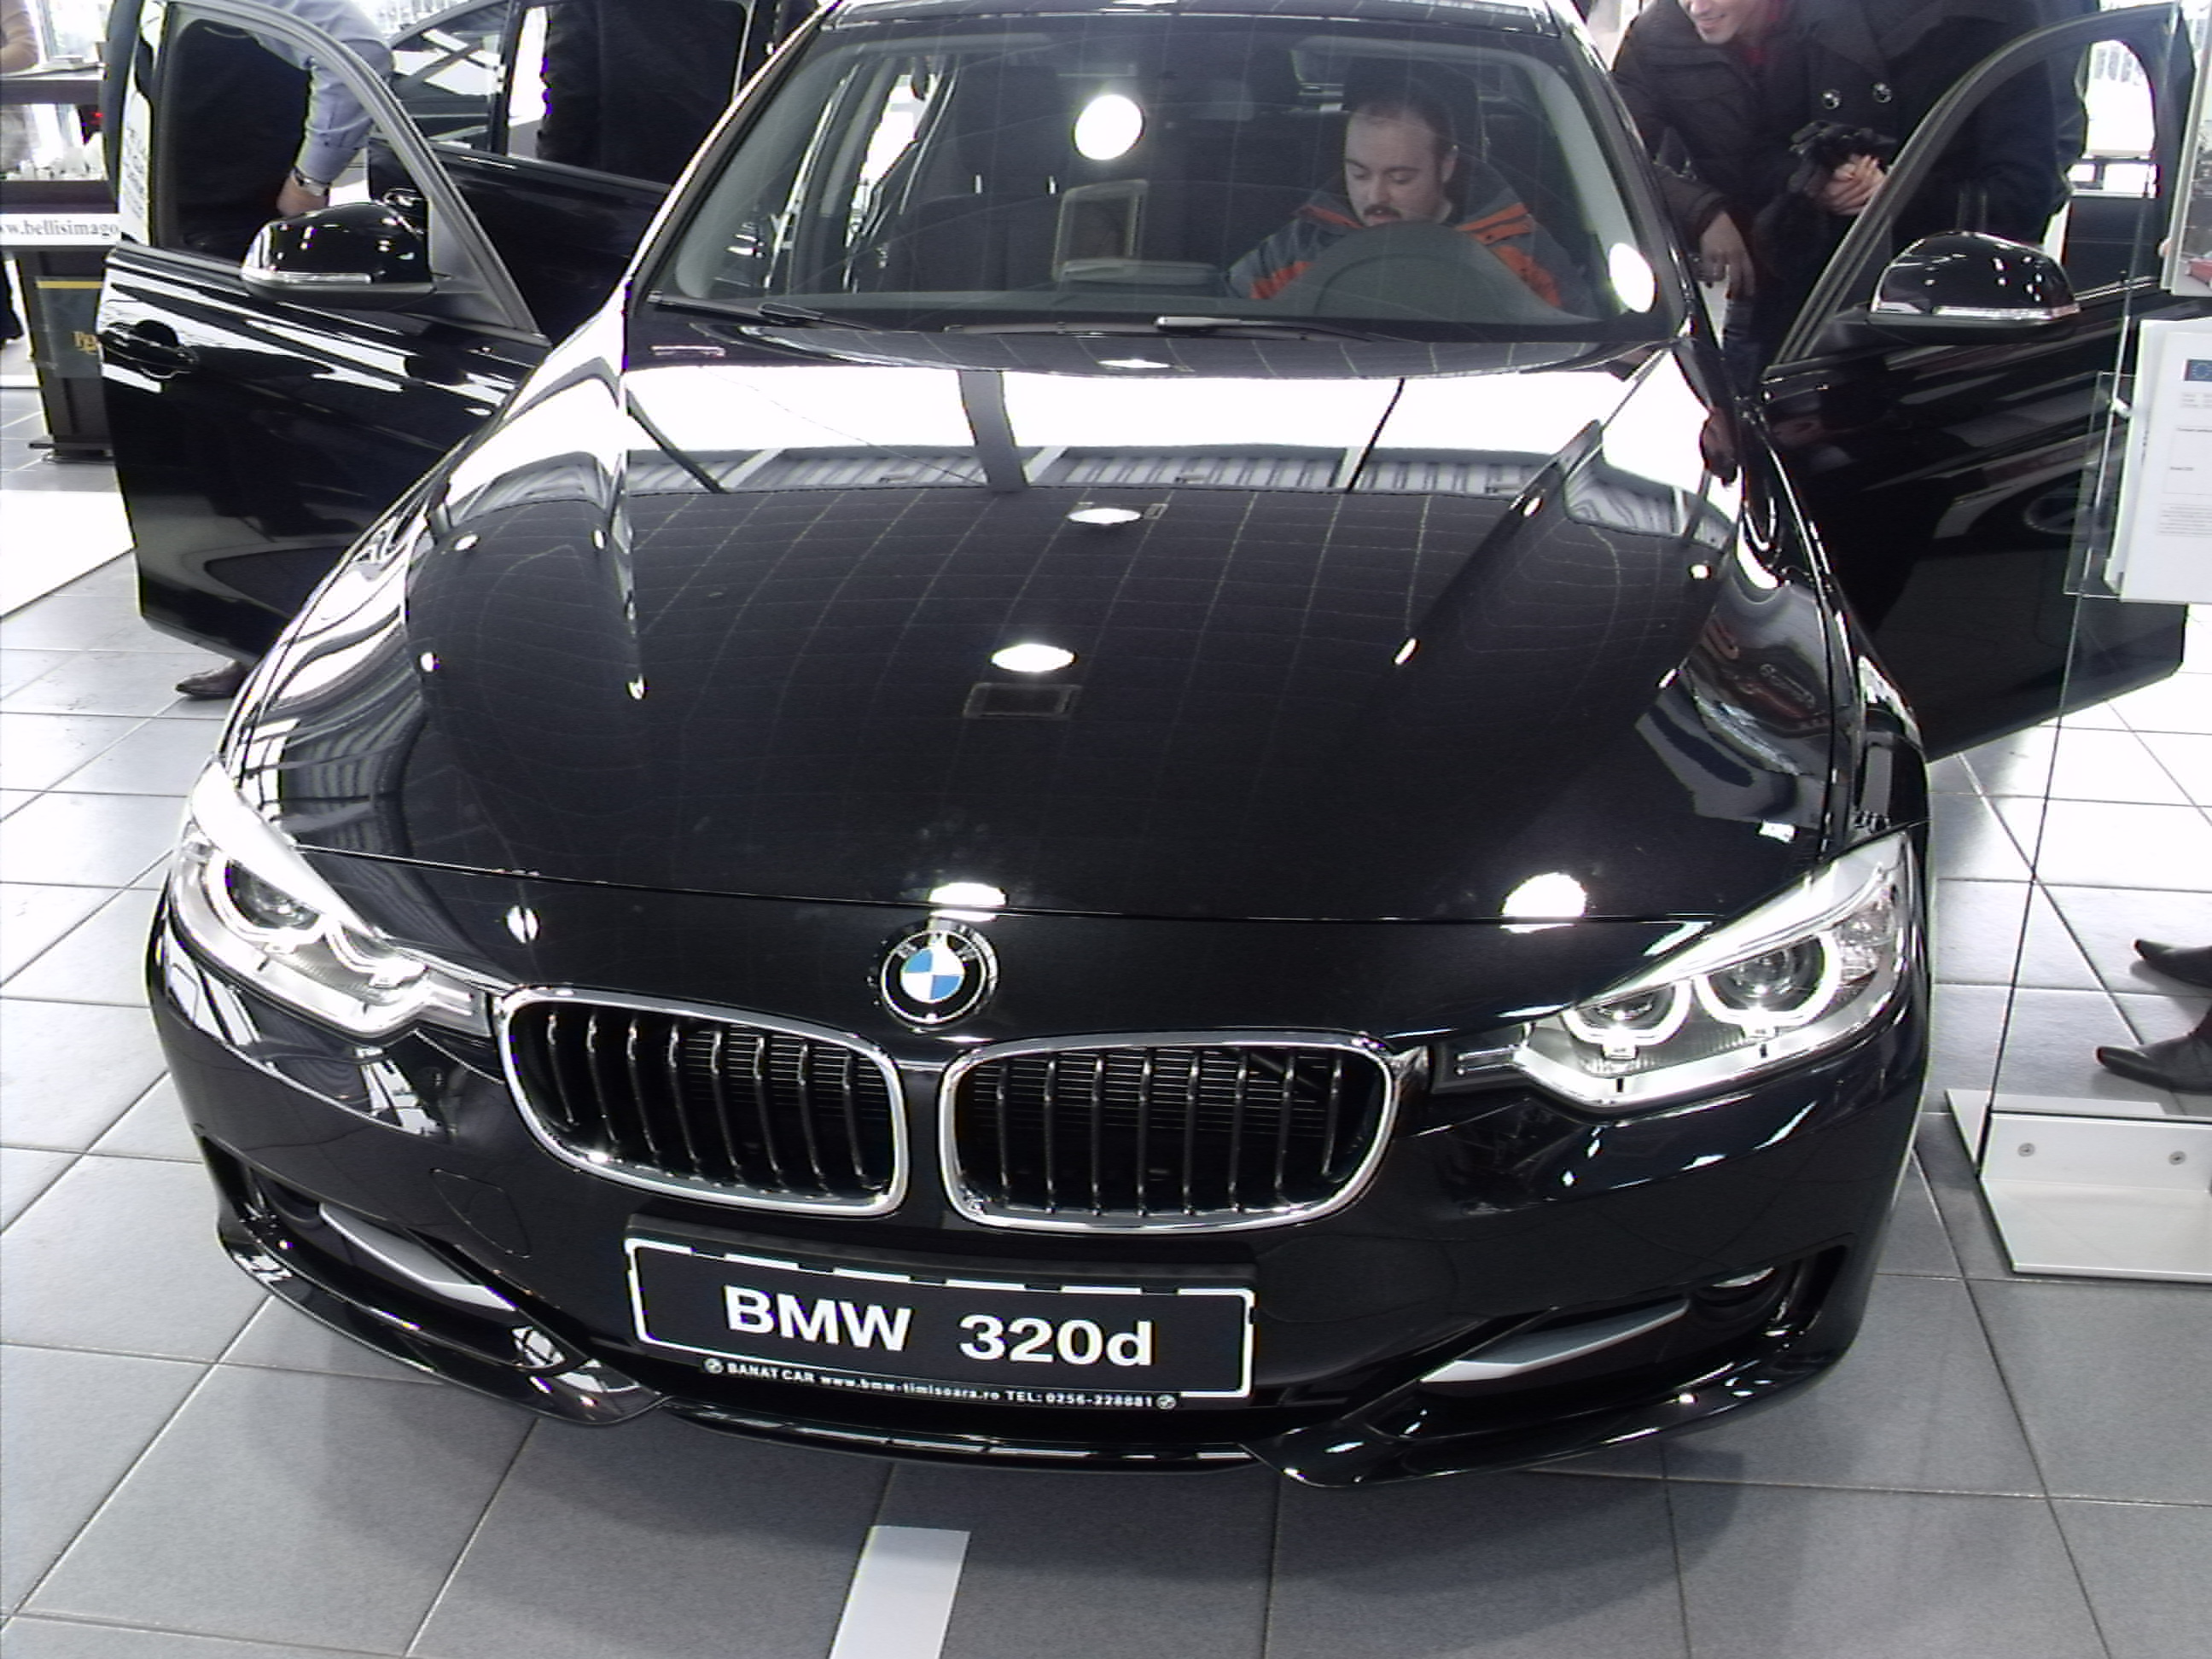 BMW’s February sales figures available